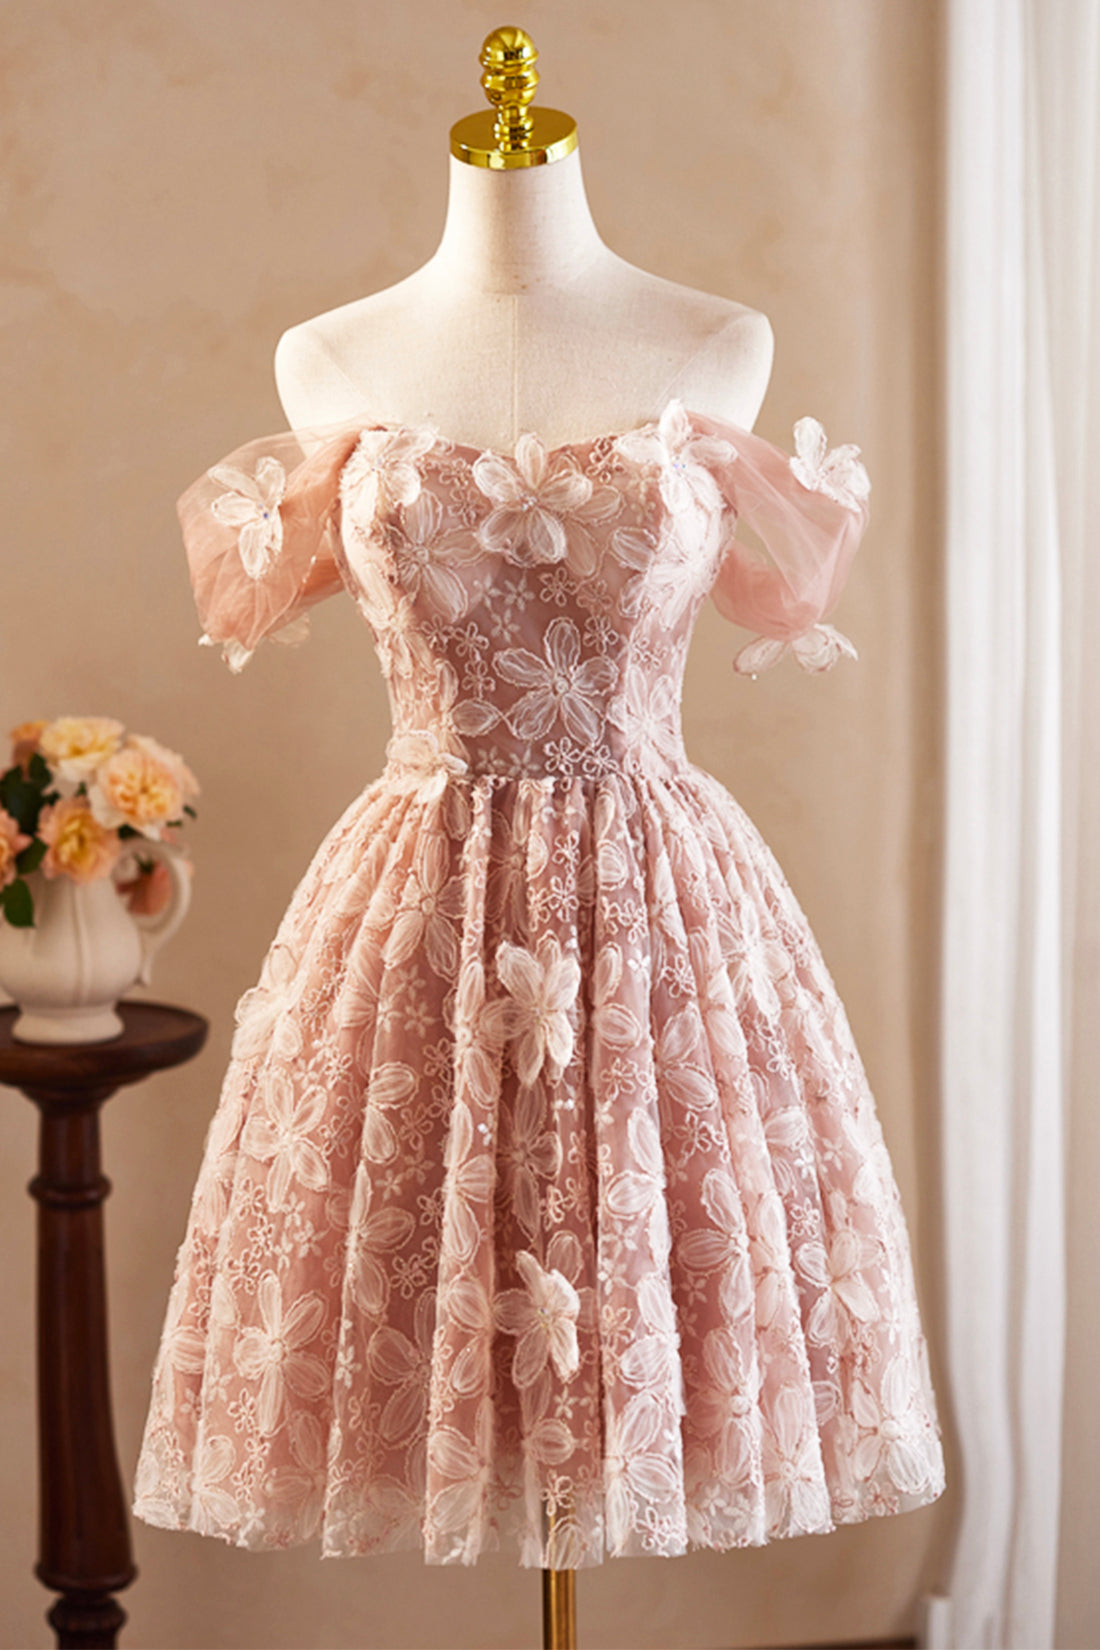 Beautiful Tulle Flower Knee Length Prom Dress, Off the Shoulder Short Sleeve Evening Party Dress